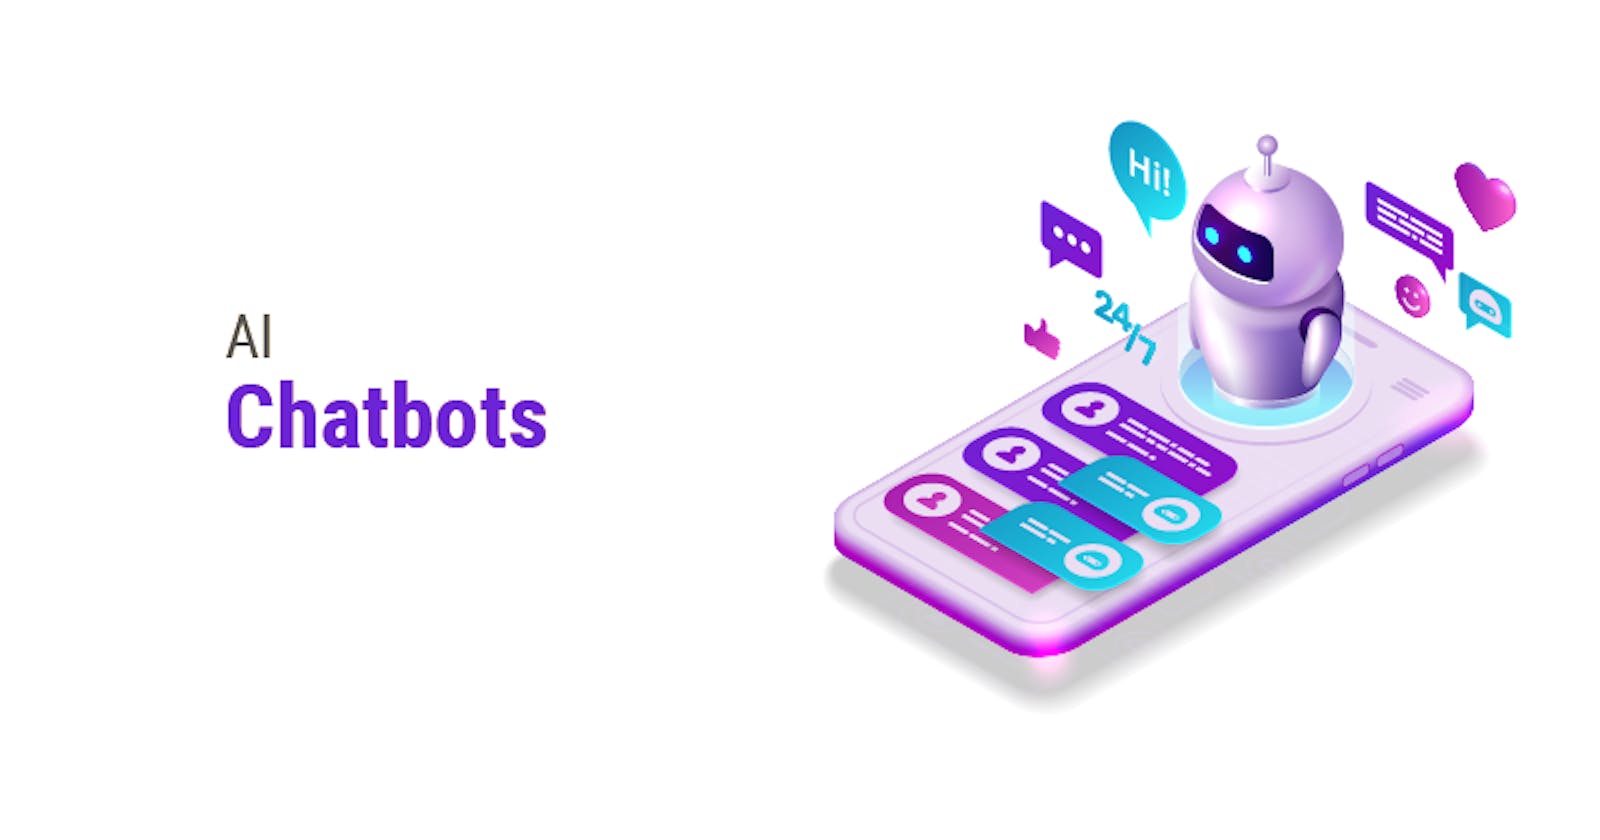 How AI Chatbots Are Shaping the Future of Online Support?